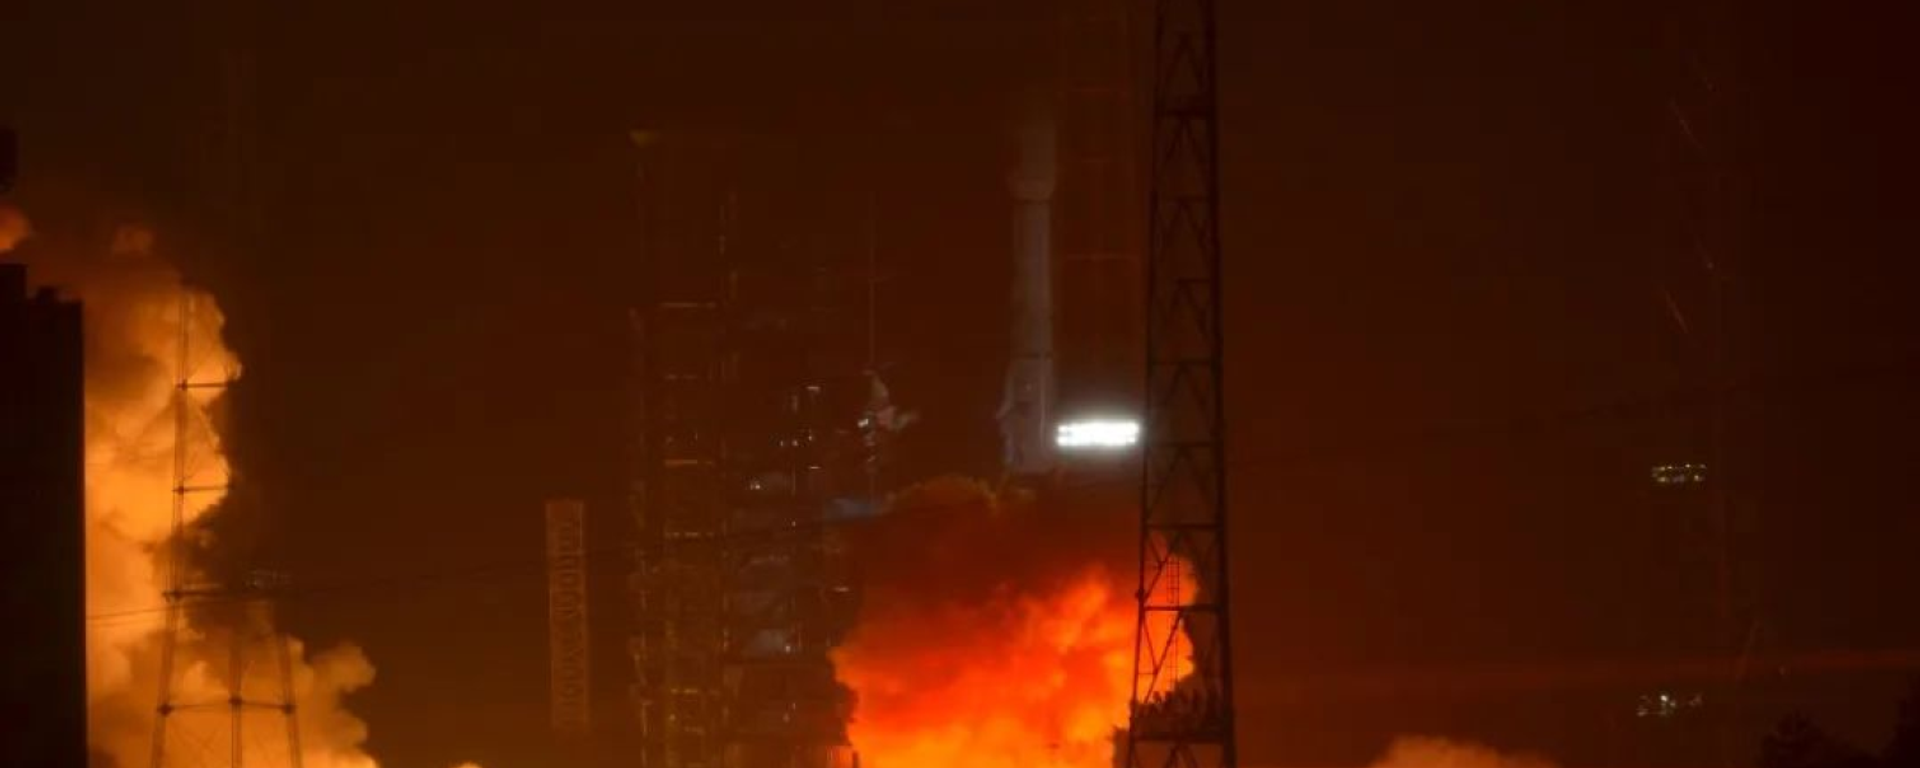 A Long March 3B rocket blasts off from the Xichang Satellite Launch Center in China’s Sichuan Province carrying the Ludi Tance-4 radar satellite on August 12, 2023. - Sputnik International, 1920, 16.08.2023